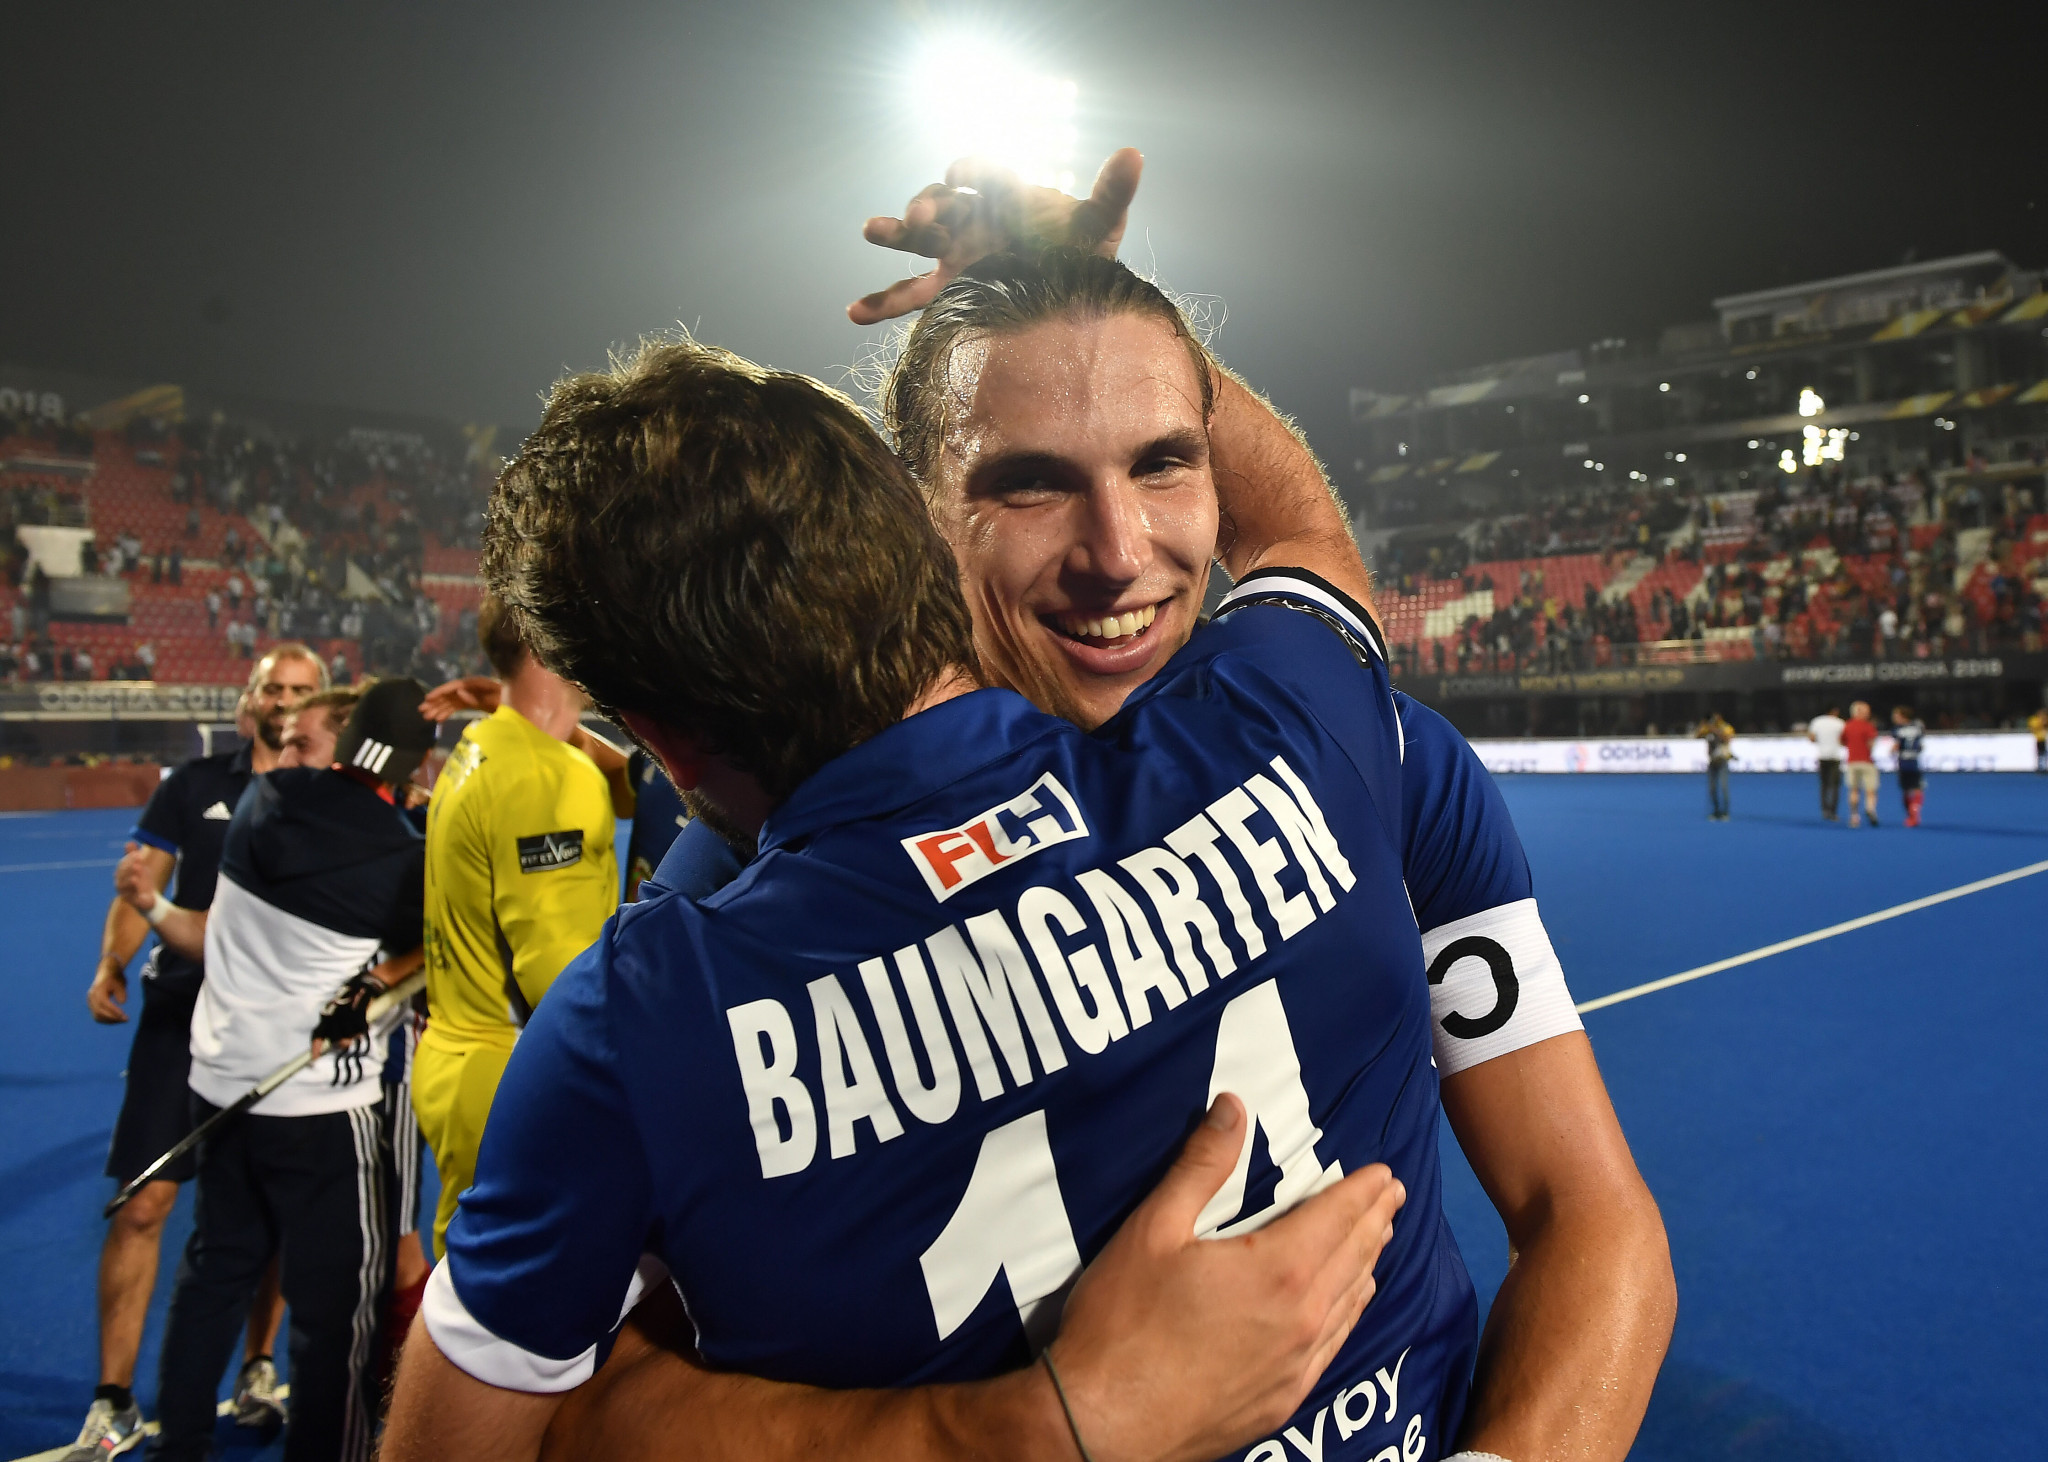 Baumgarten nets twice in comfortable French win against South Africa in Hockey Pro League